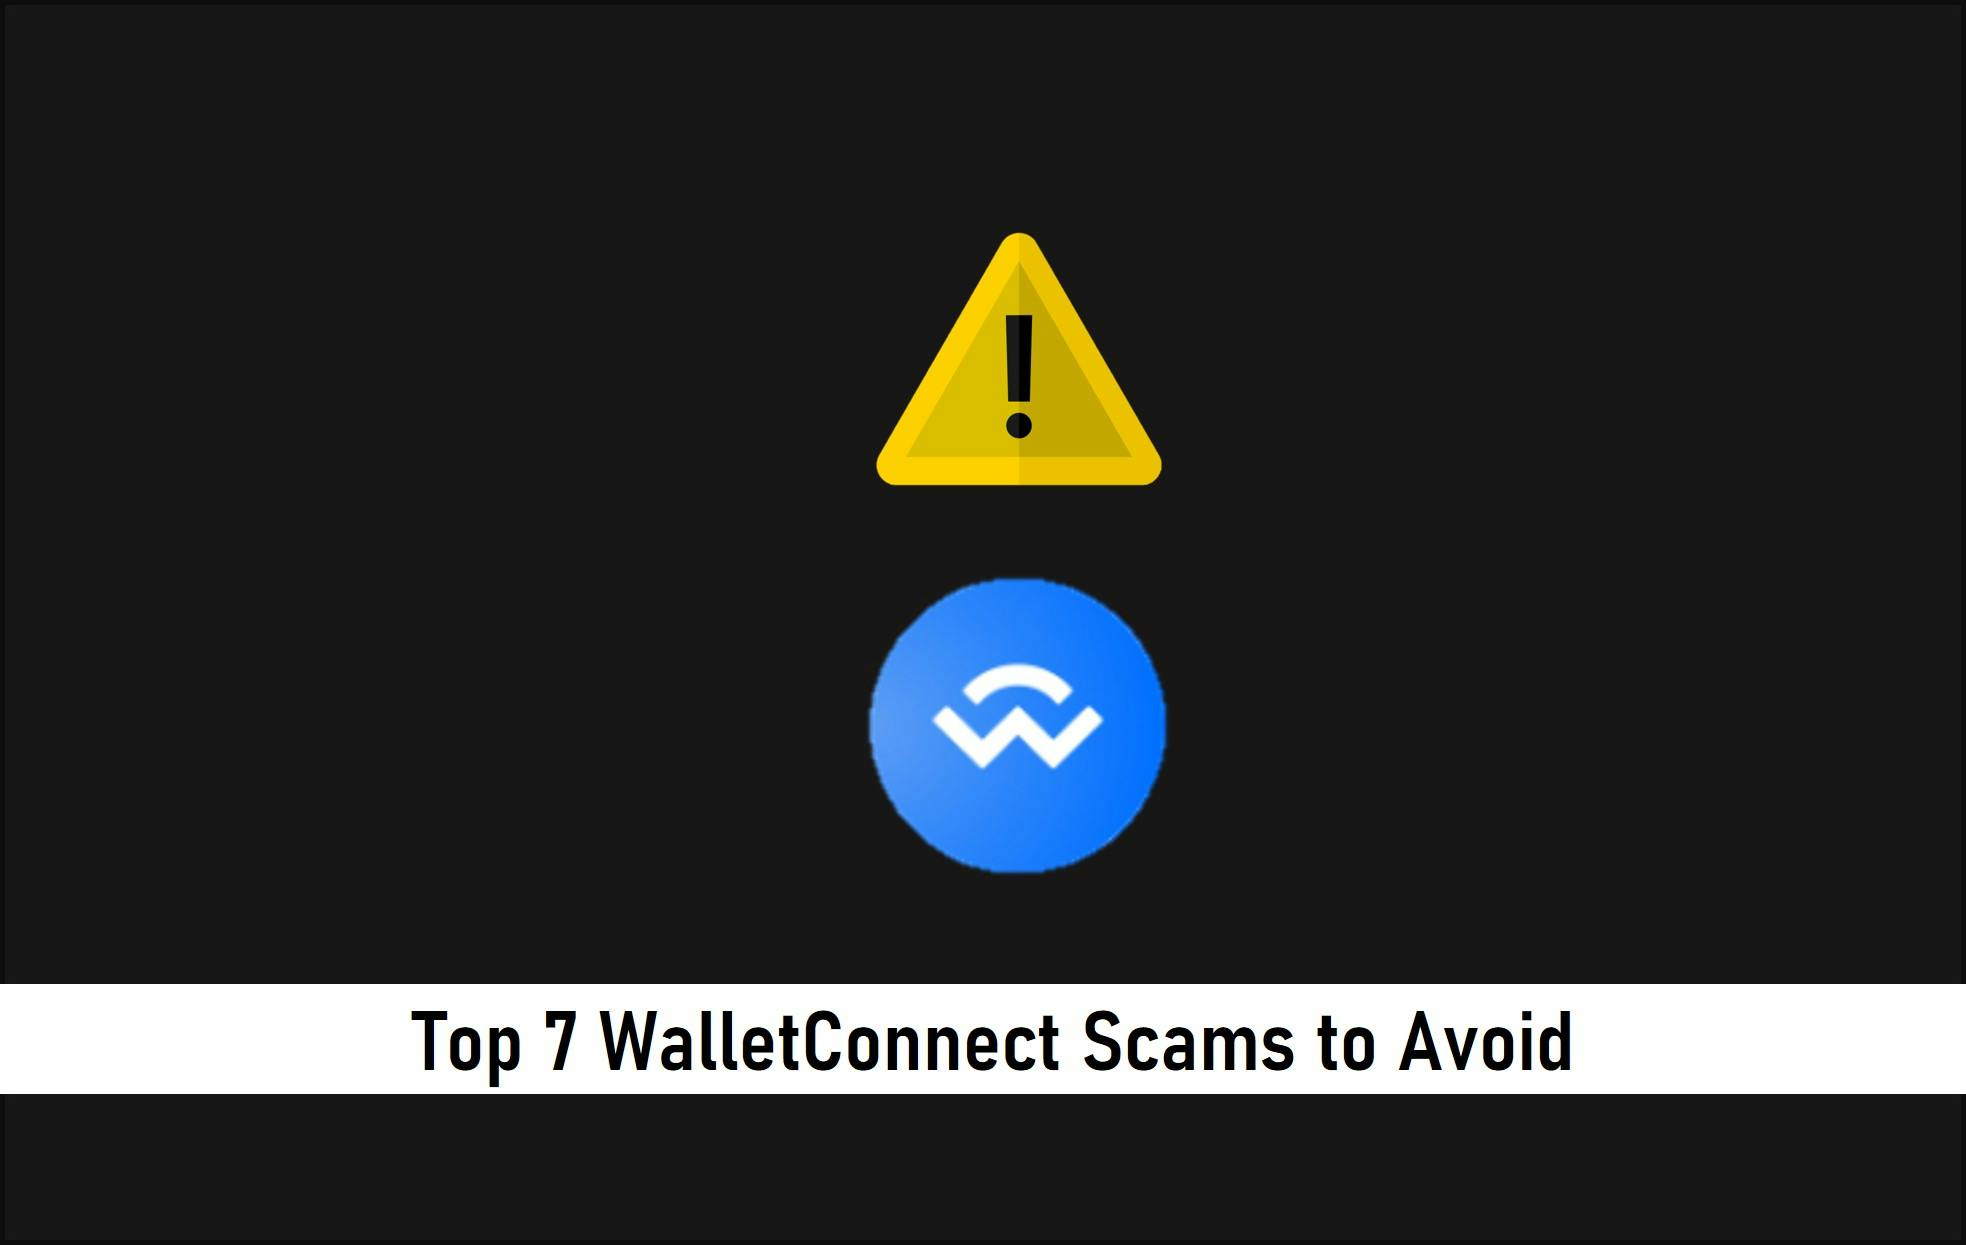 Top 7 WalletConnect Scams to Avoid